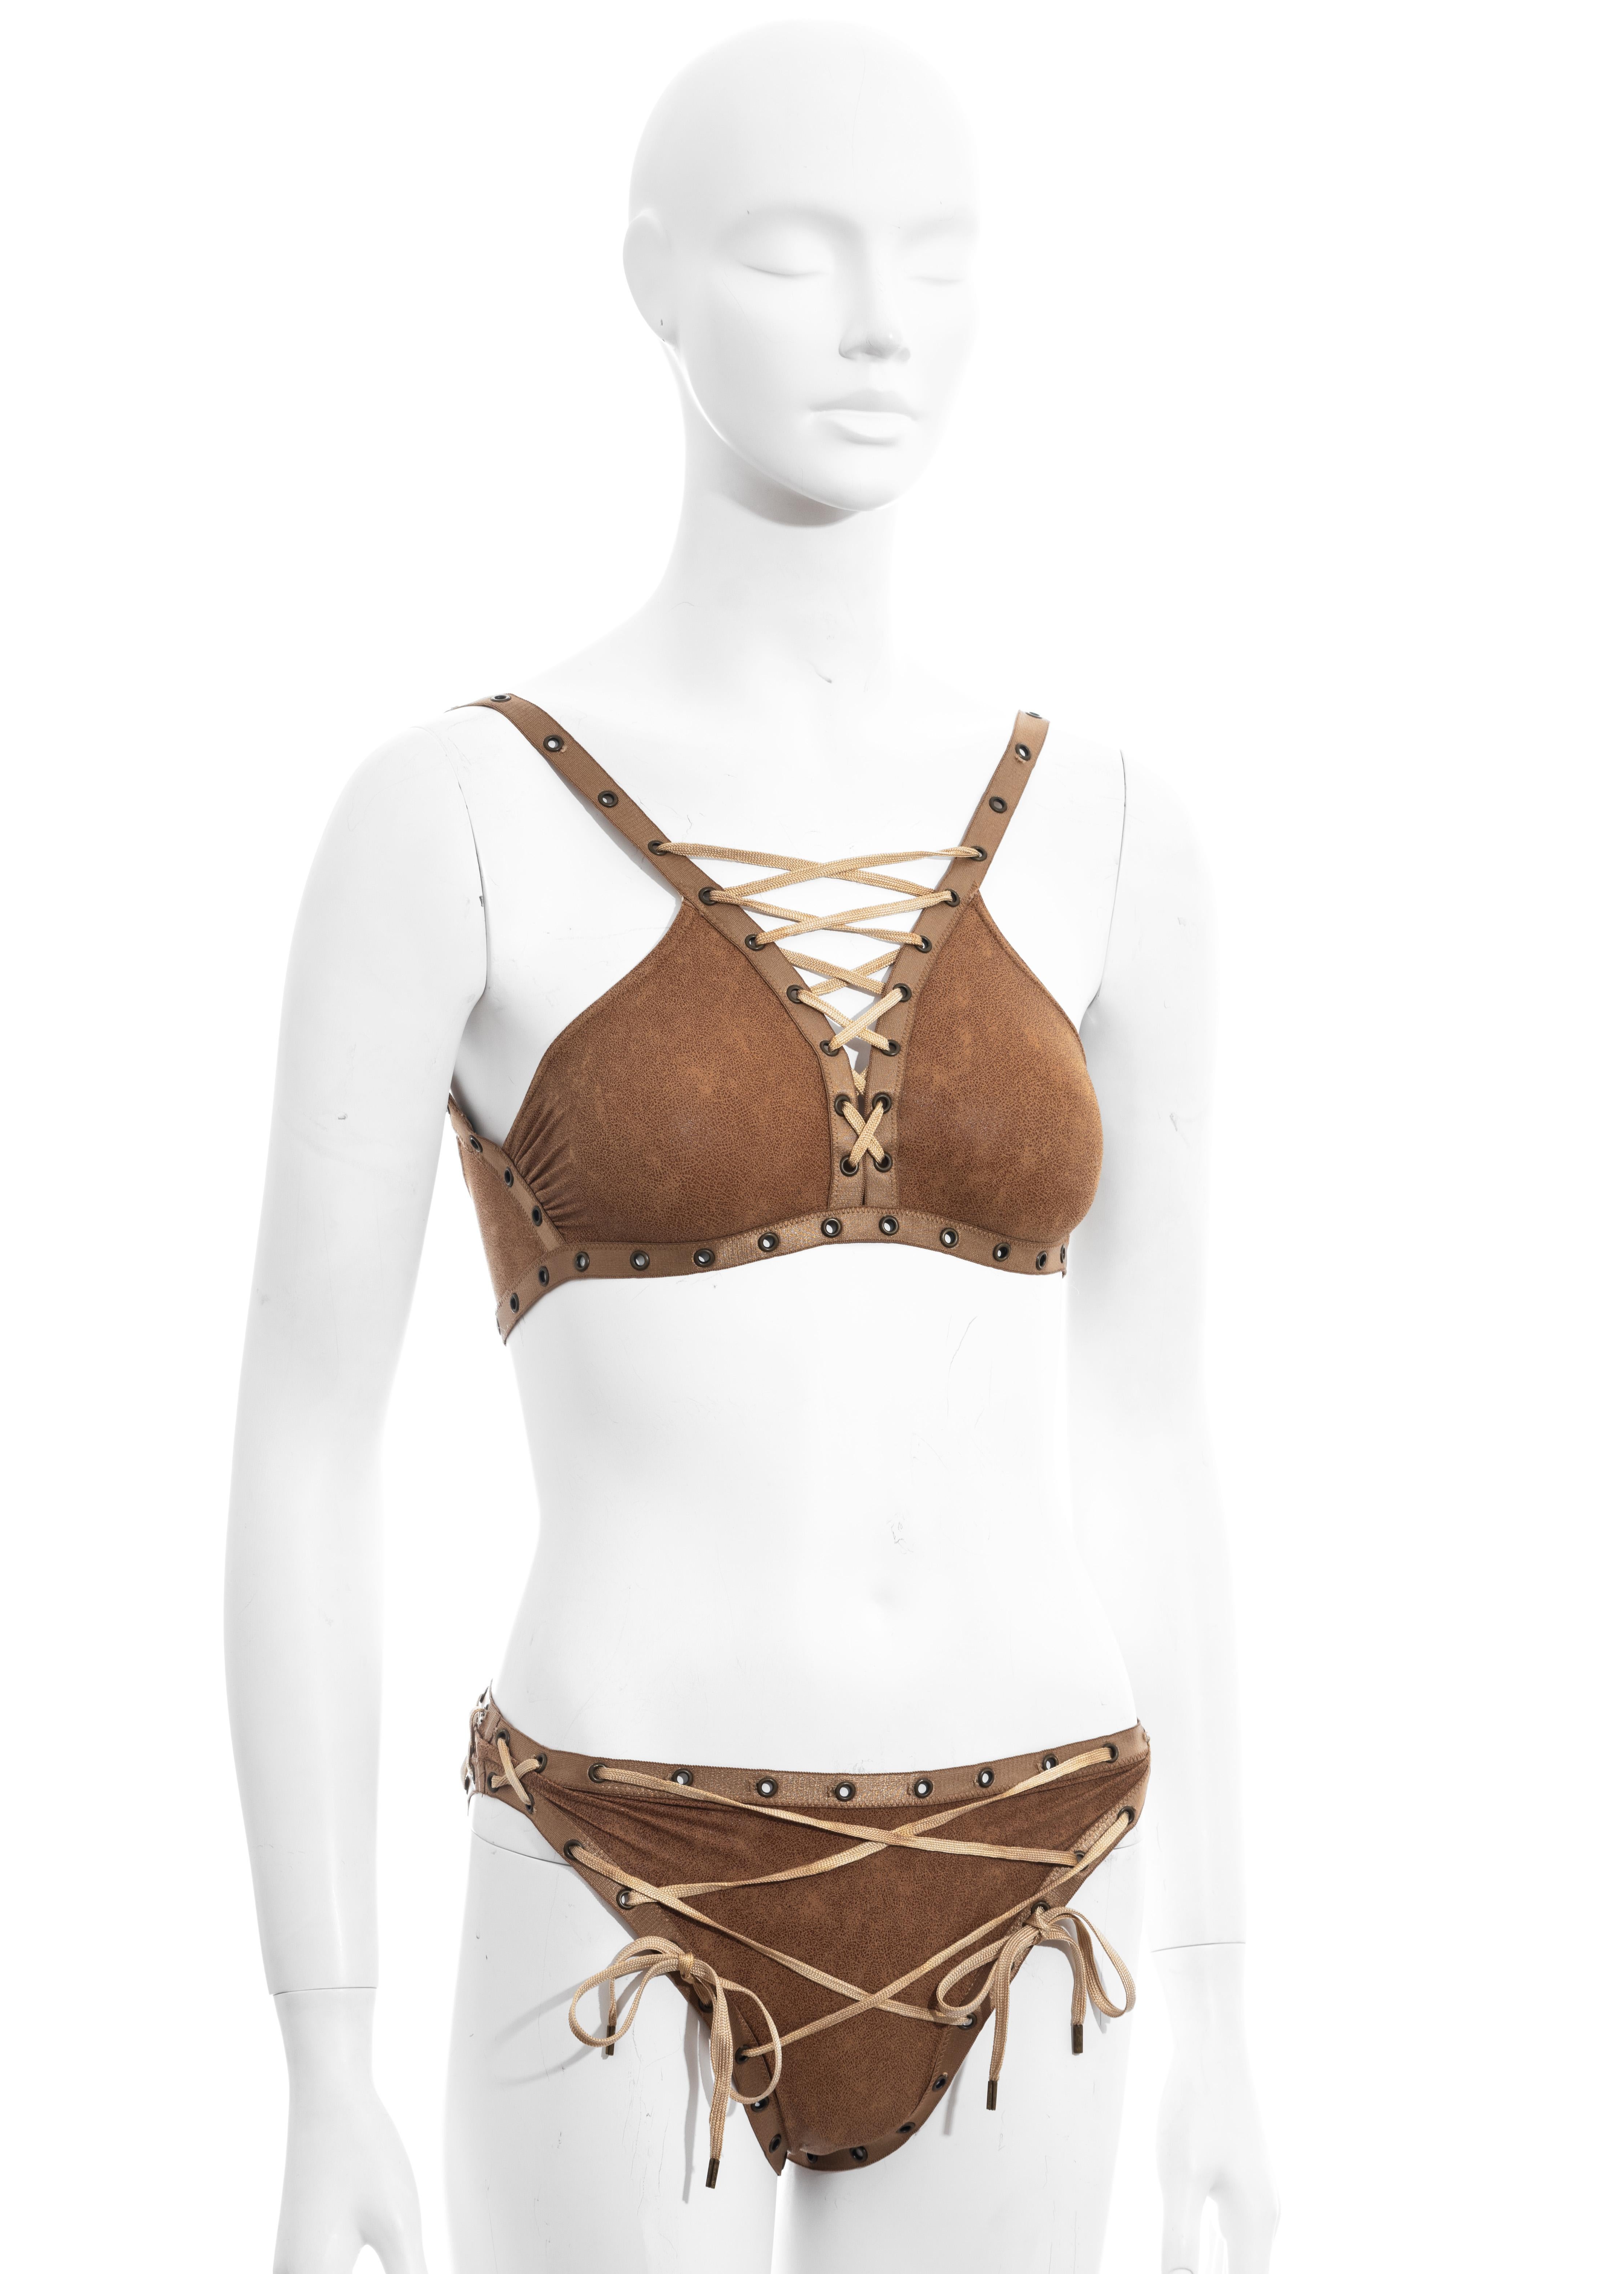 ▪ Christian Dior brown leather effect two-piece bikini
▪ Designed by John Galliano
▪ 86% Nylon, 14% Lycra 
▪ Size Small (has been altered)
▪ Spring-Summer 2003 